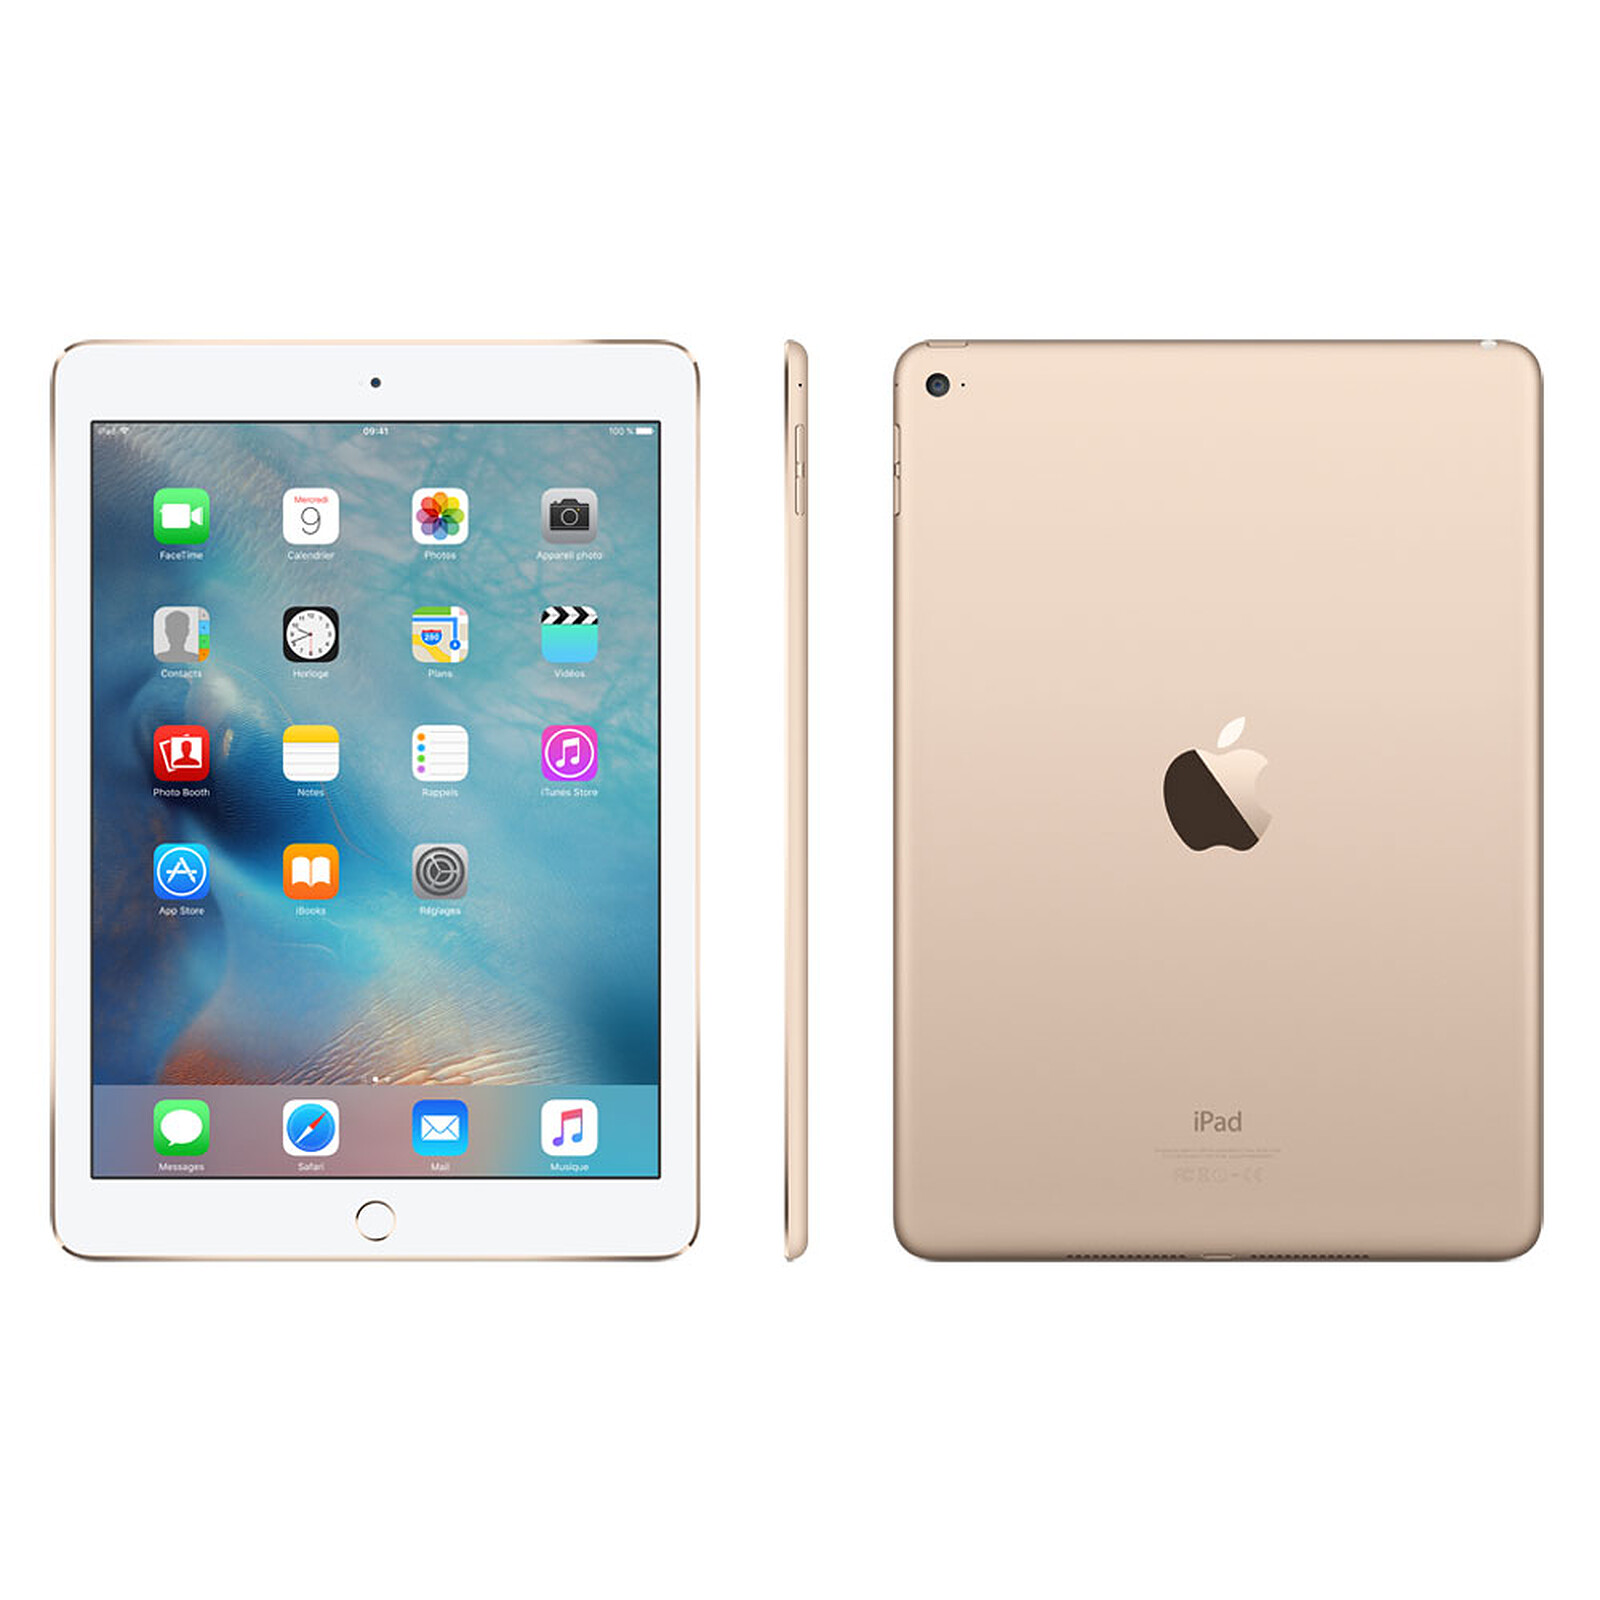 Apple iPad Air 2 16 Go Wi-Fi Or · Reconditionné - Tablette tactile